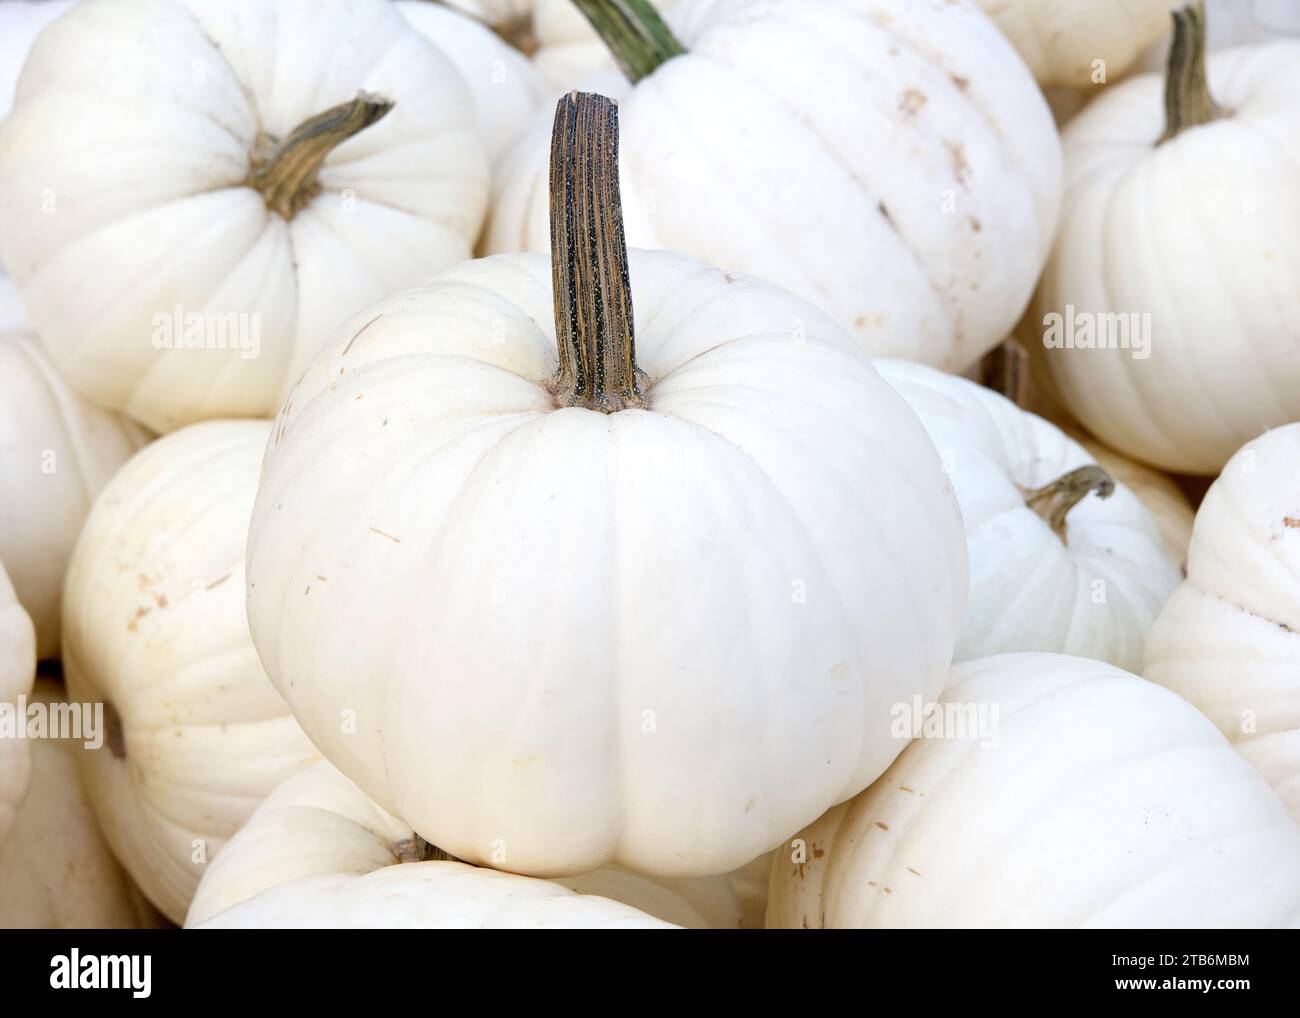 Top view flat lay of many autumn white Cucurbita maxima pumpkins in a pile. Popular holiday decoration. Stock Photo